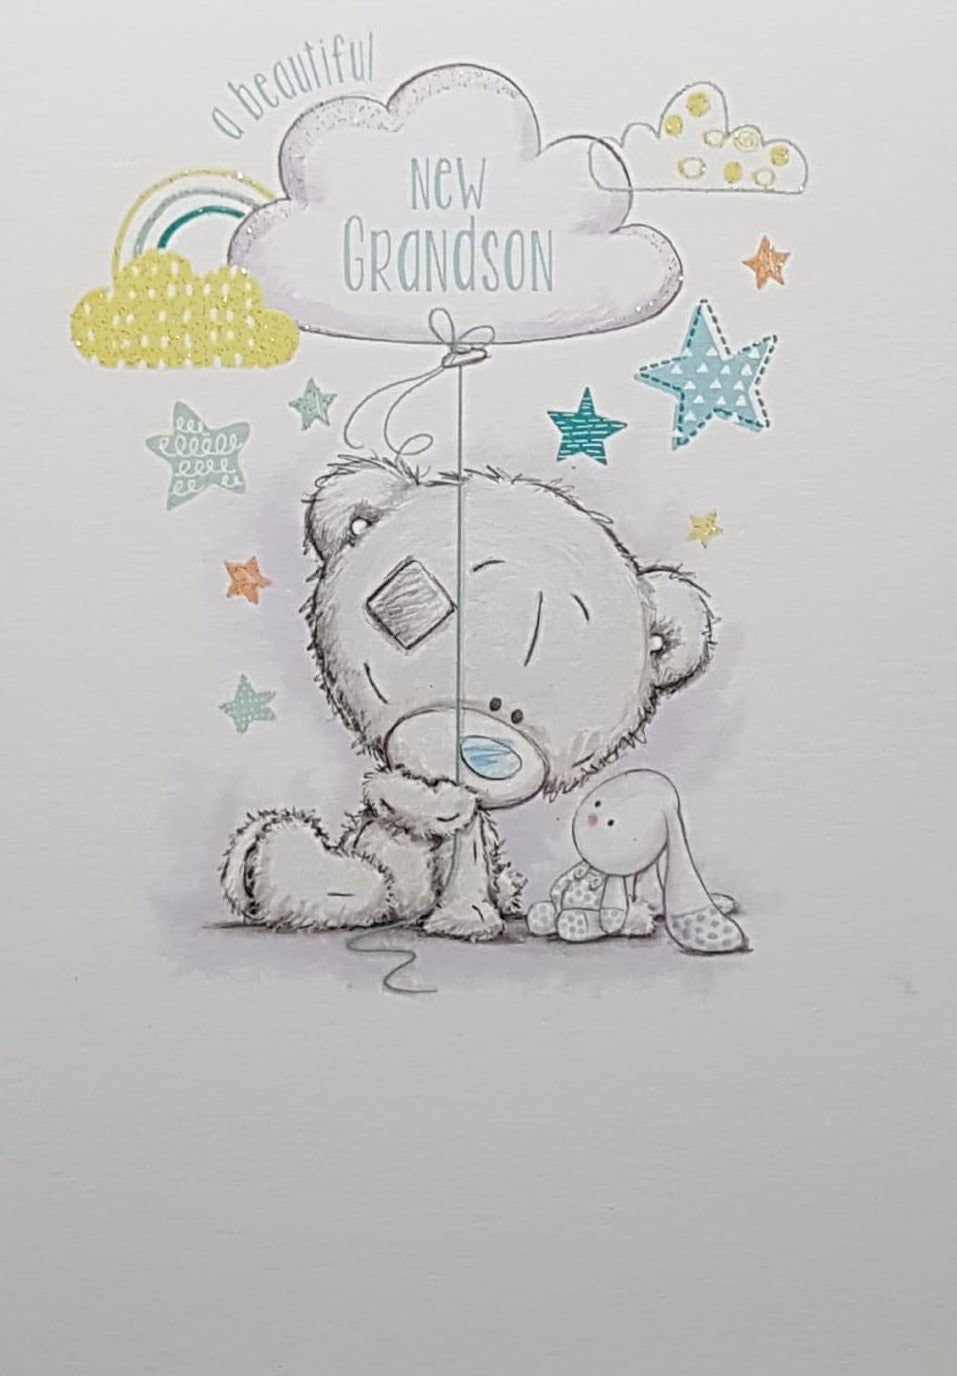 New Baby Card - New Grandson / Teddy Holding A Cloud Balloon With A Rabbit